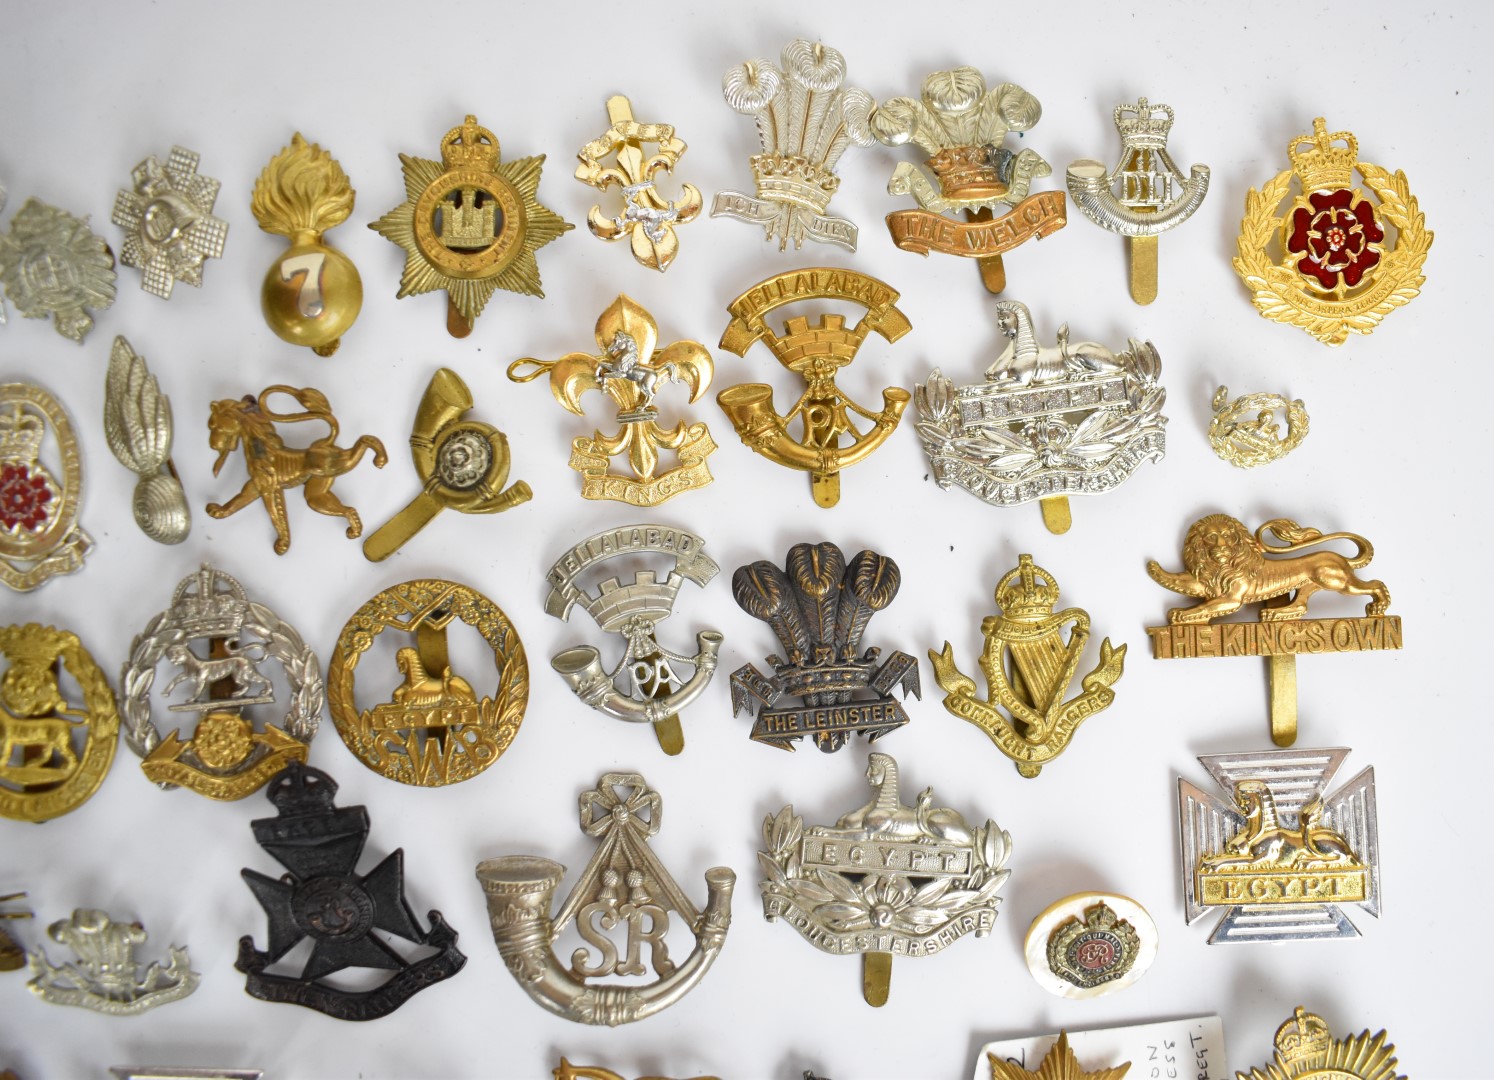 Large collection of approximately 100 British Army cap badges including Royal Sussex Regiment, - Image 14 of 14